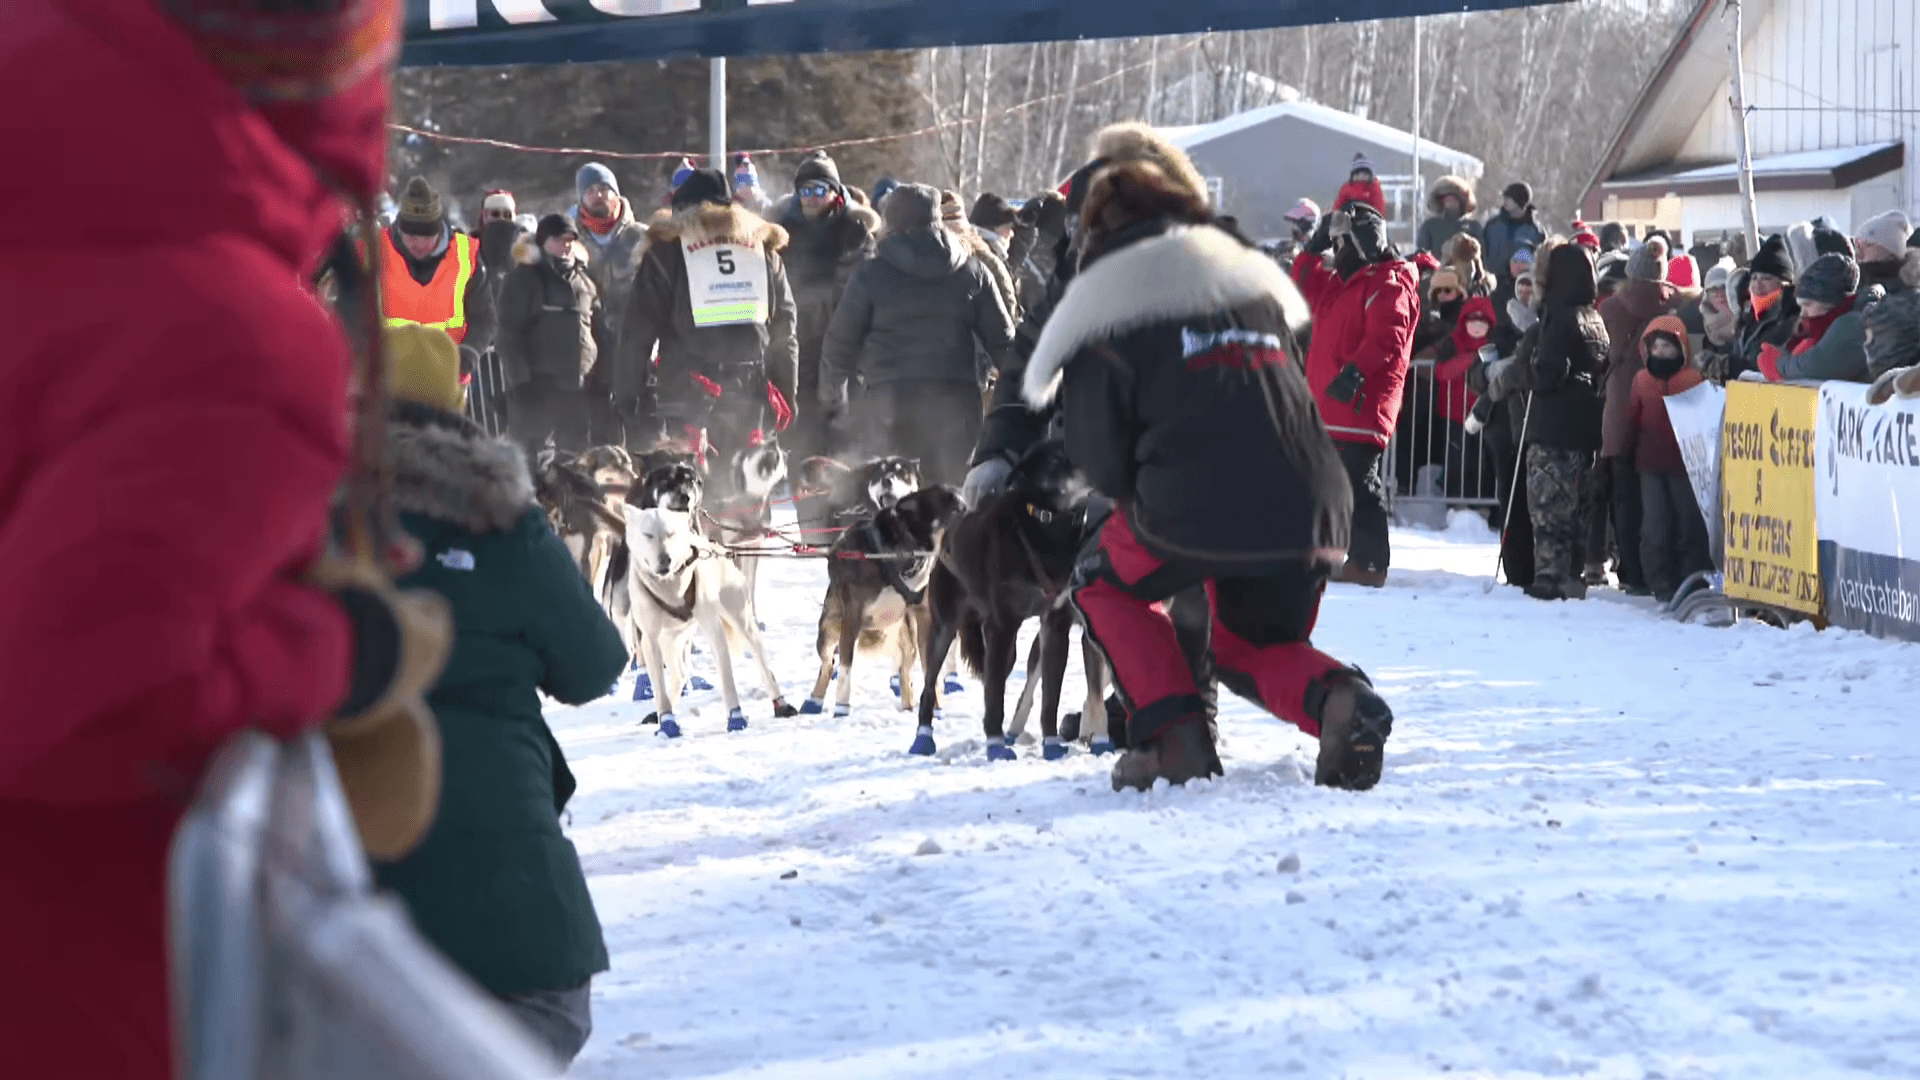 Musher bib 5 with his team at the start.